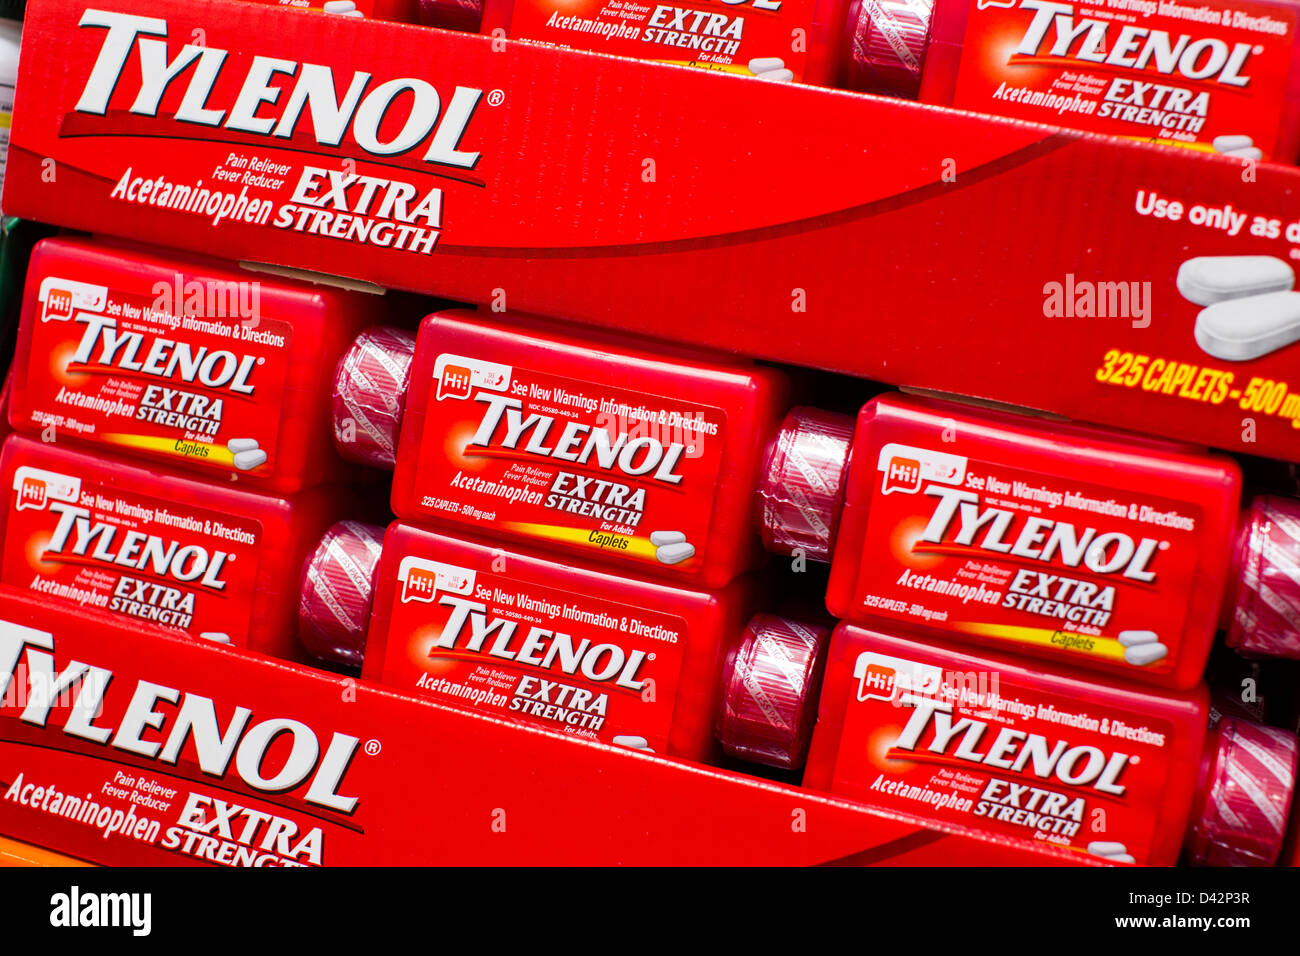 Tylenol extra strength on display at a Costco Wholesale Warehouse Club. Stock Photo